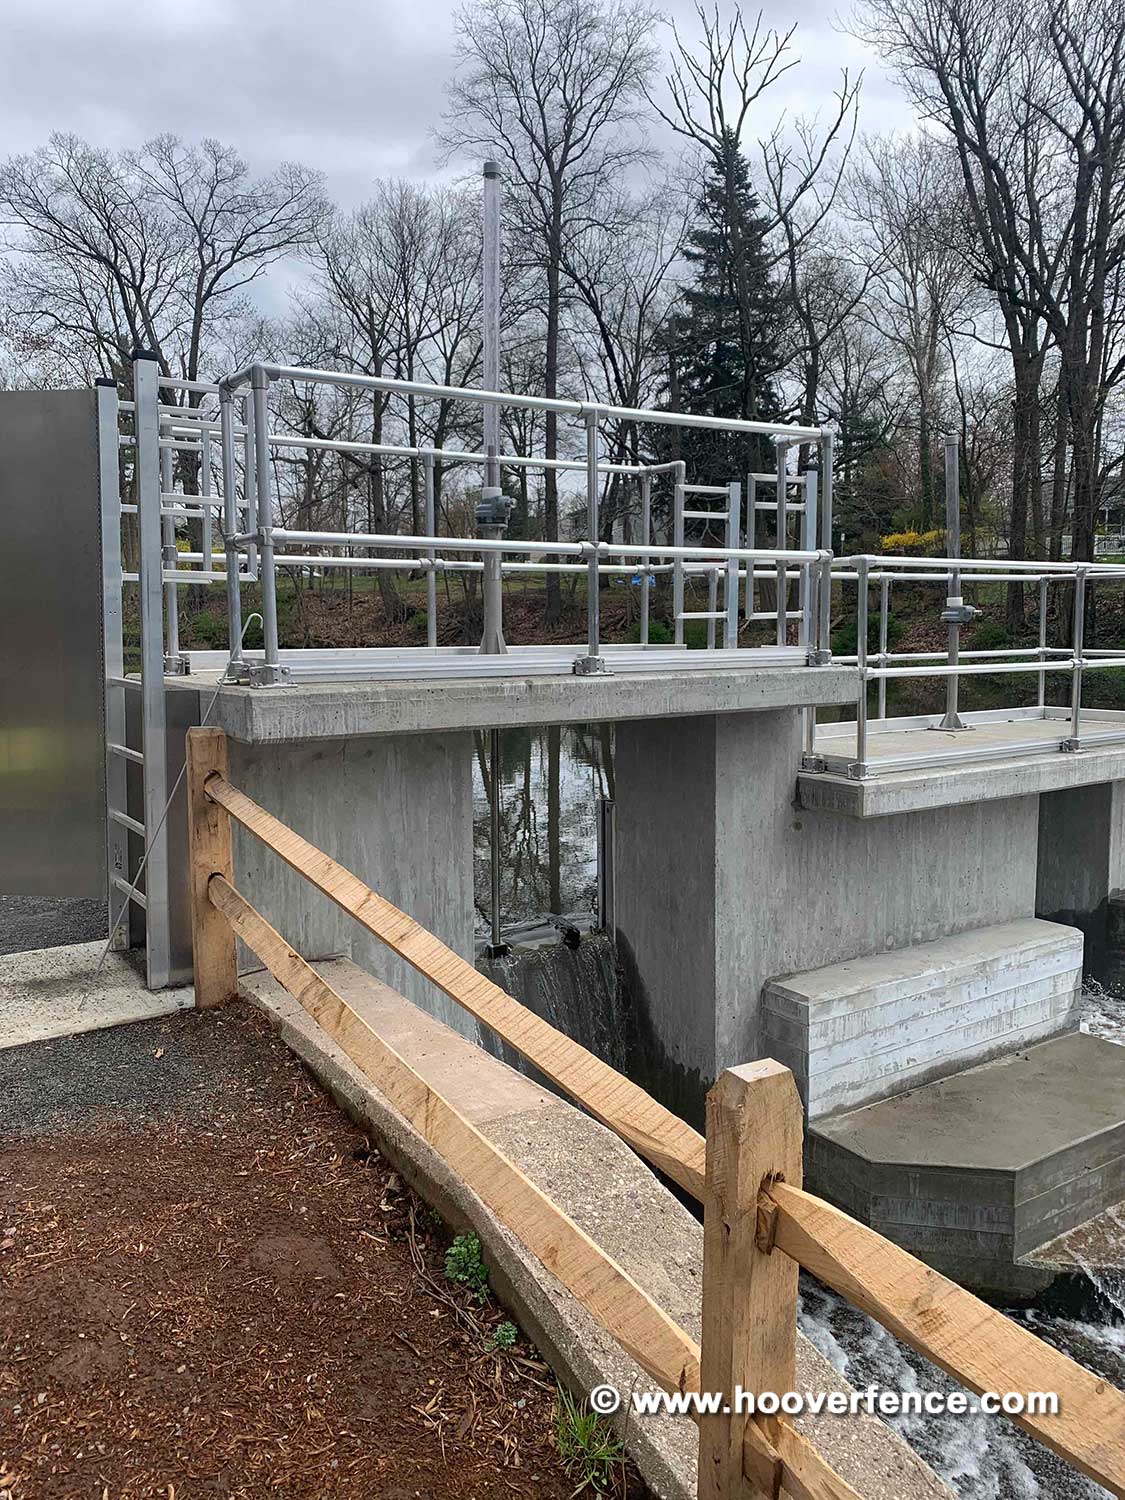 Customer Install - Aluminum Safety Railing Using Kee Lite Fittings and Aluminum Sch40 for Water Locks